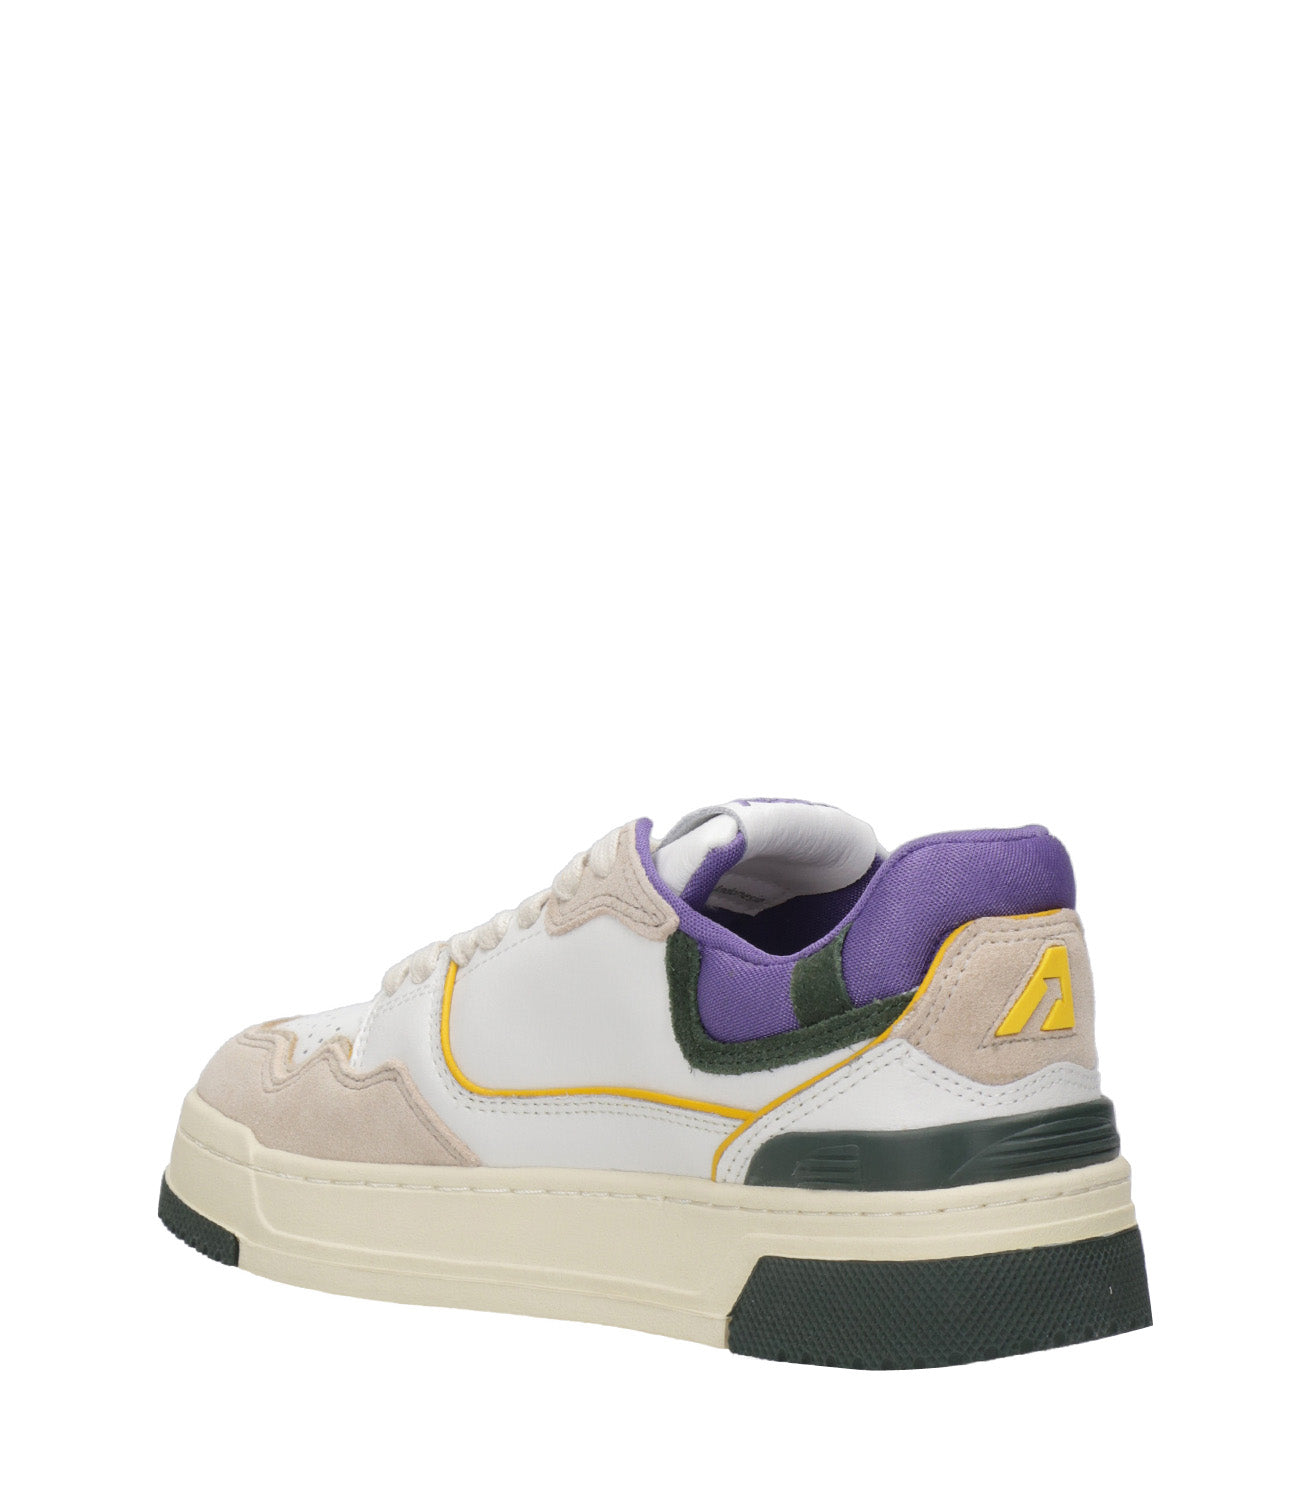 Autry | Sneakers CLC Low White, Green and Purple